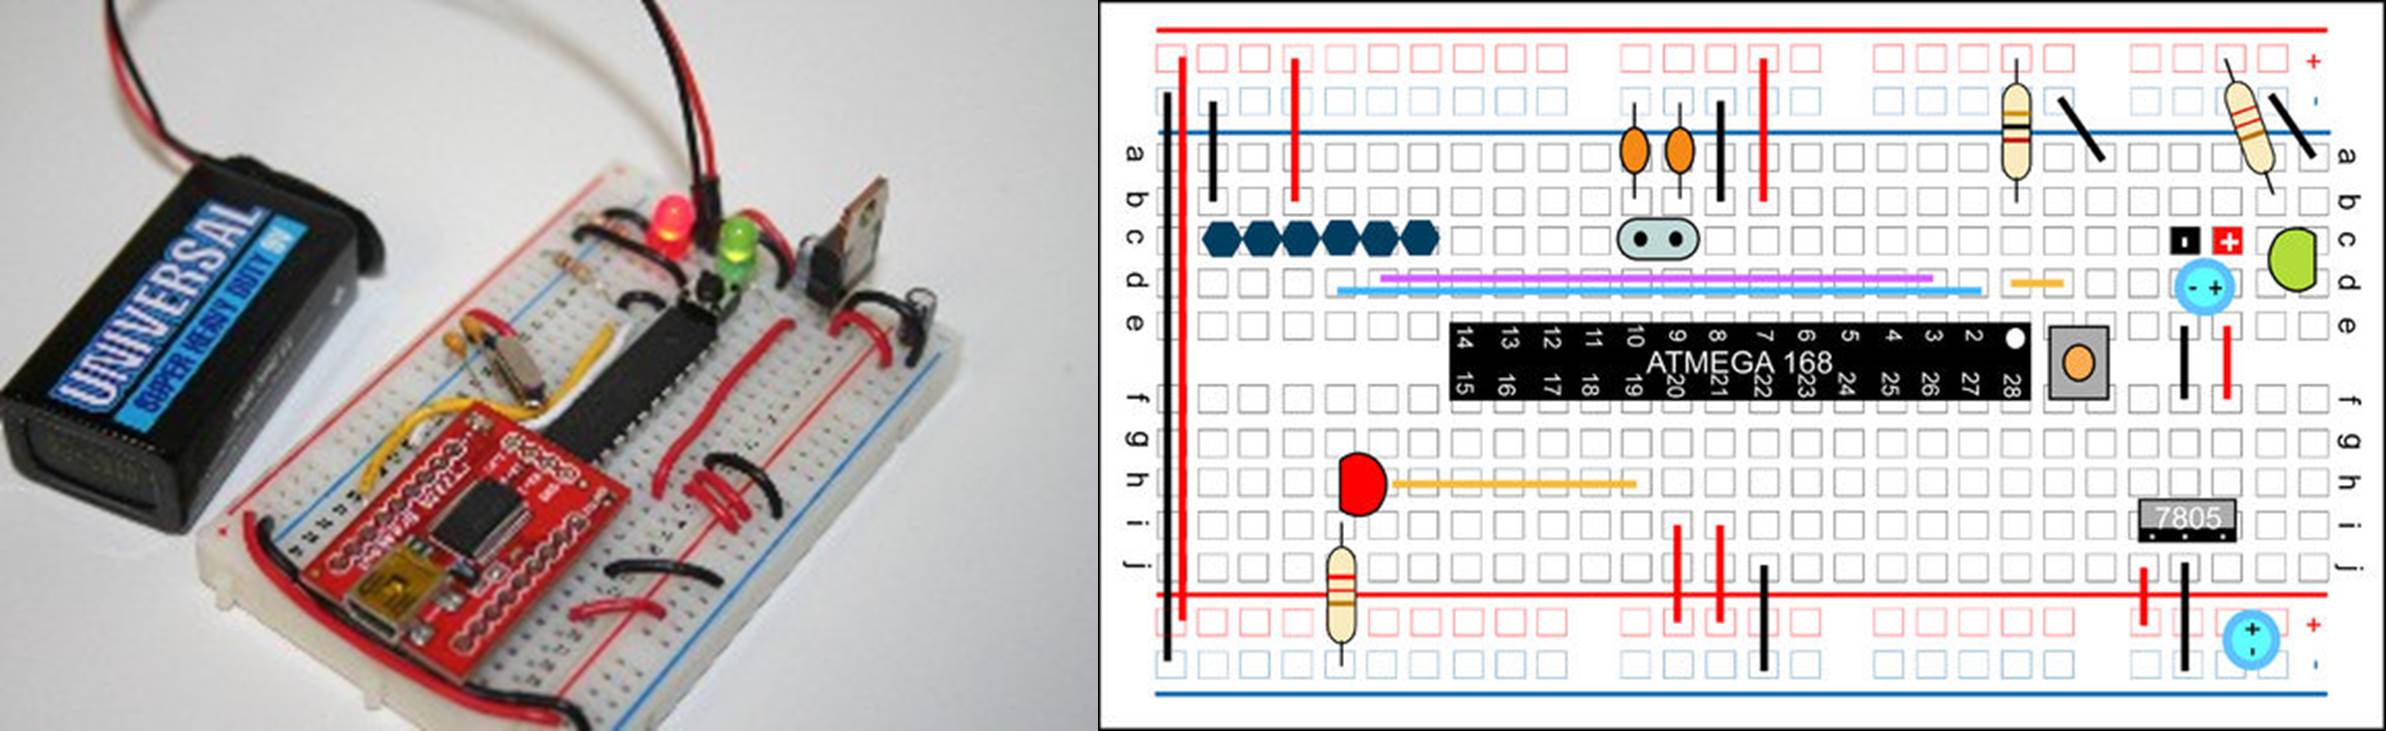 Make Your Own Arduino On A Breadboard